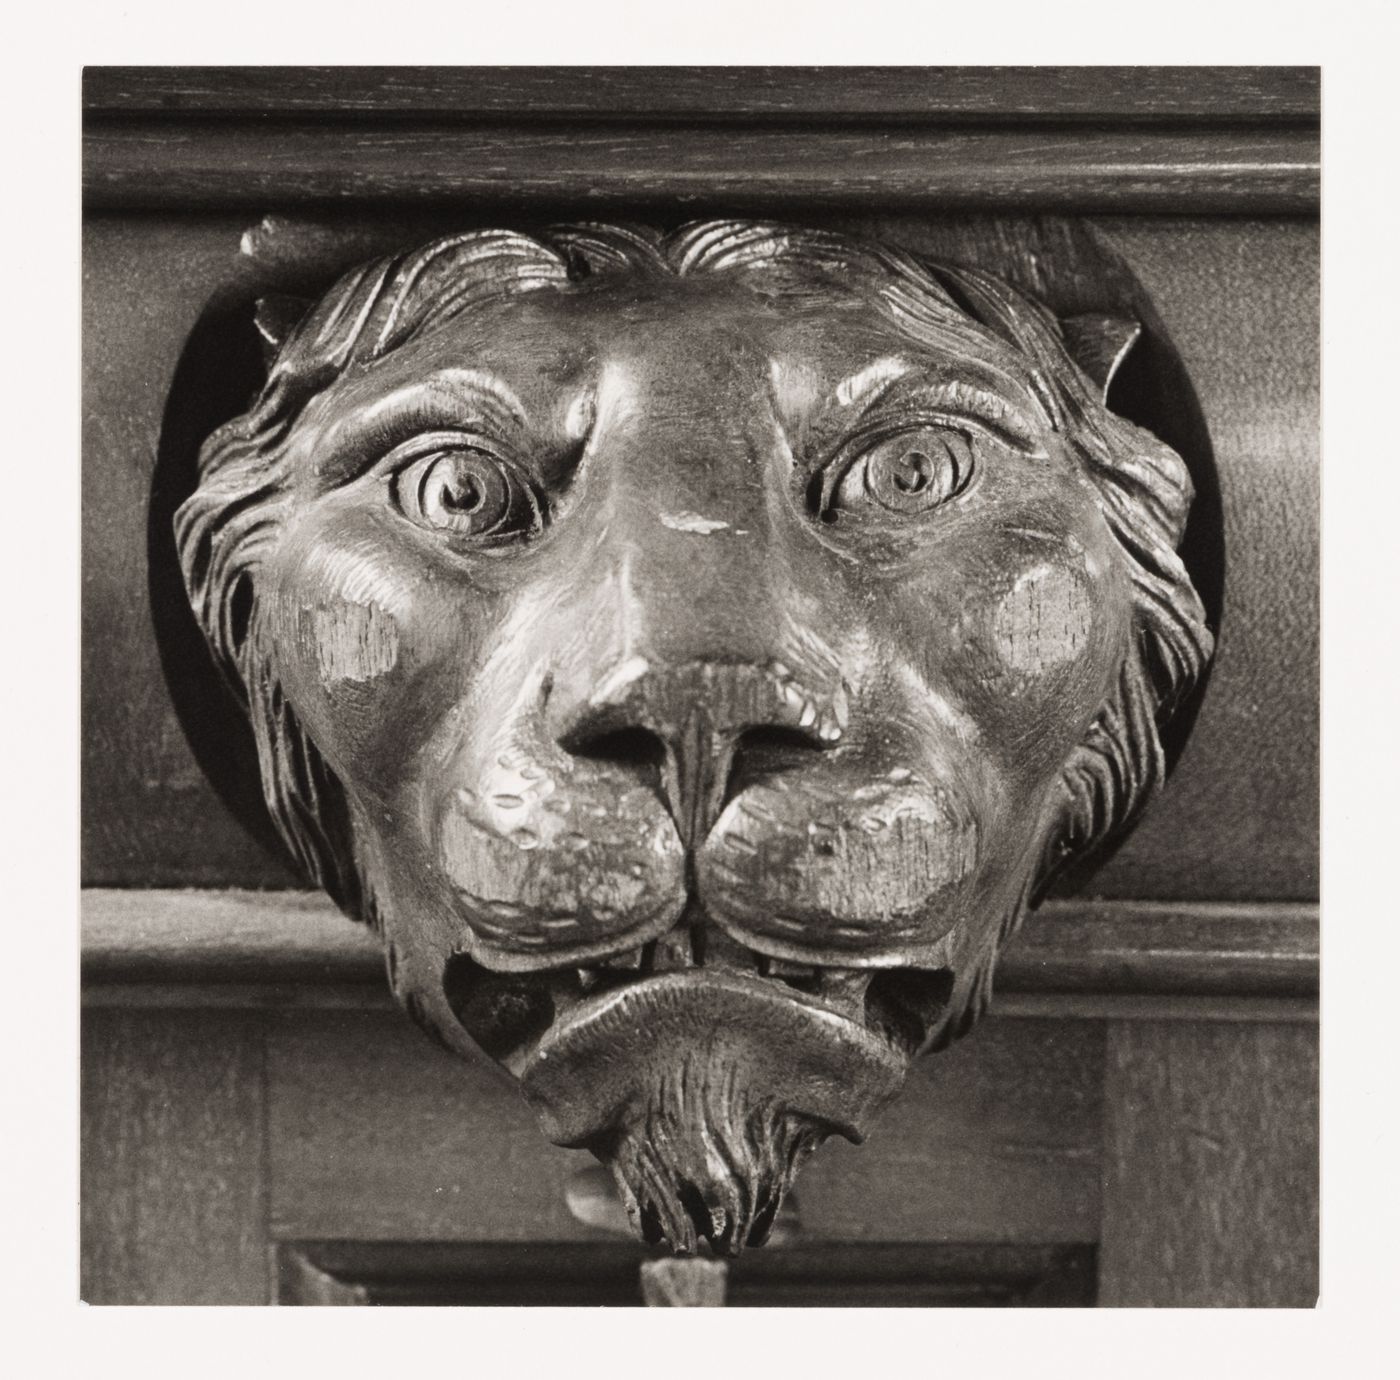 Close-up view of a carved lion head on the wall paneling of the tea room, Shaughnessy House, Montréal, Québec, Canada